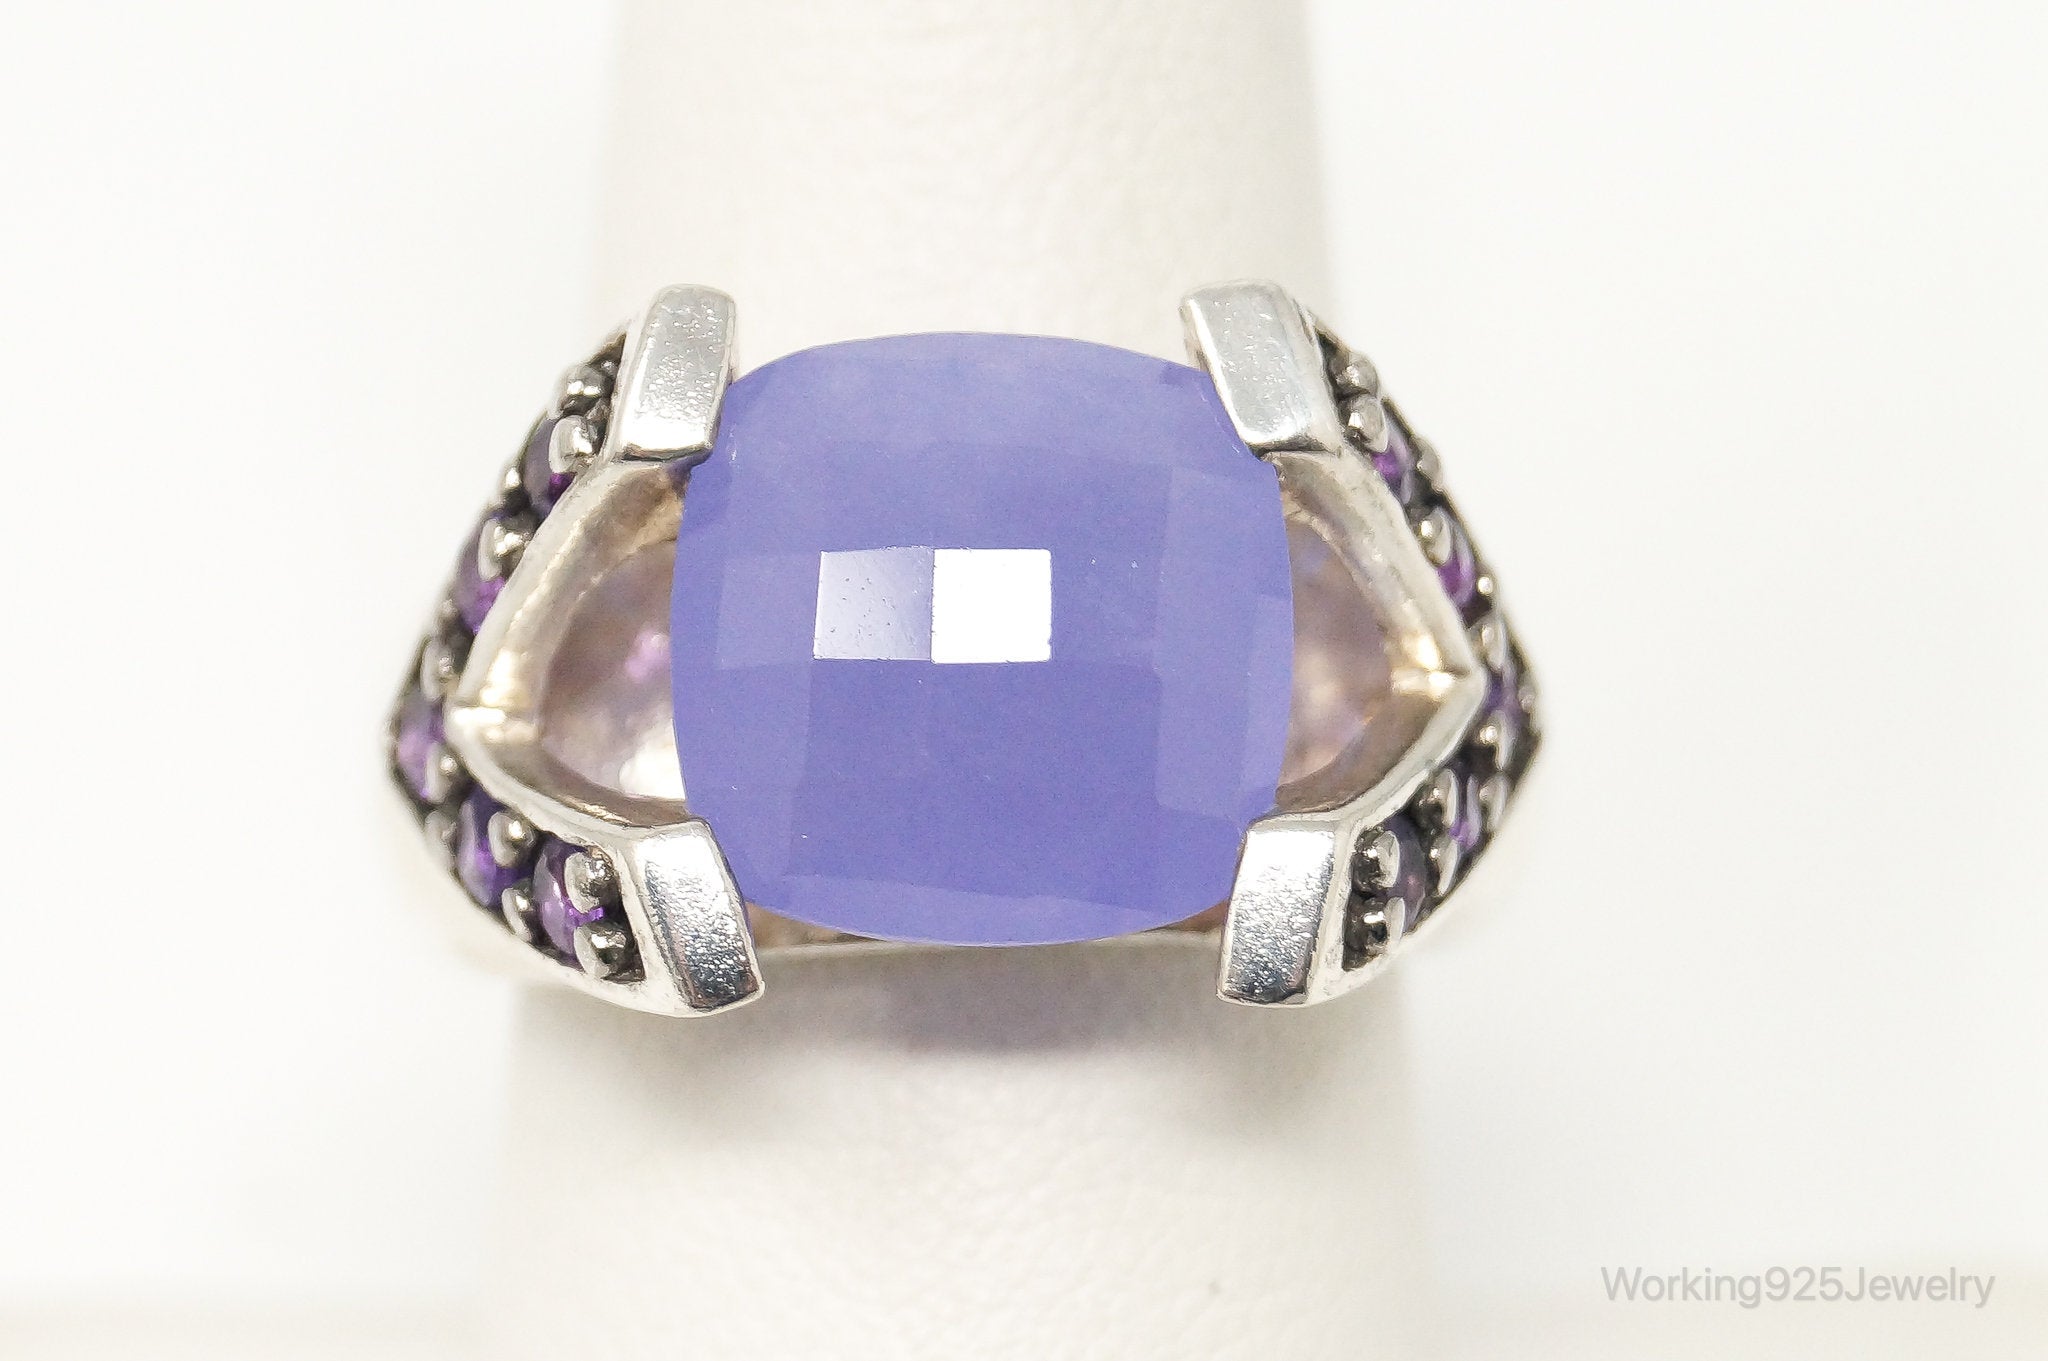 Vintage Lavender Chalcedony Amethyst Sterling Silver Ring - Size 8